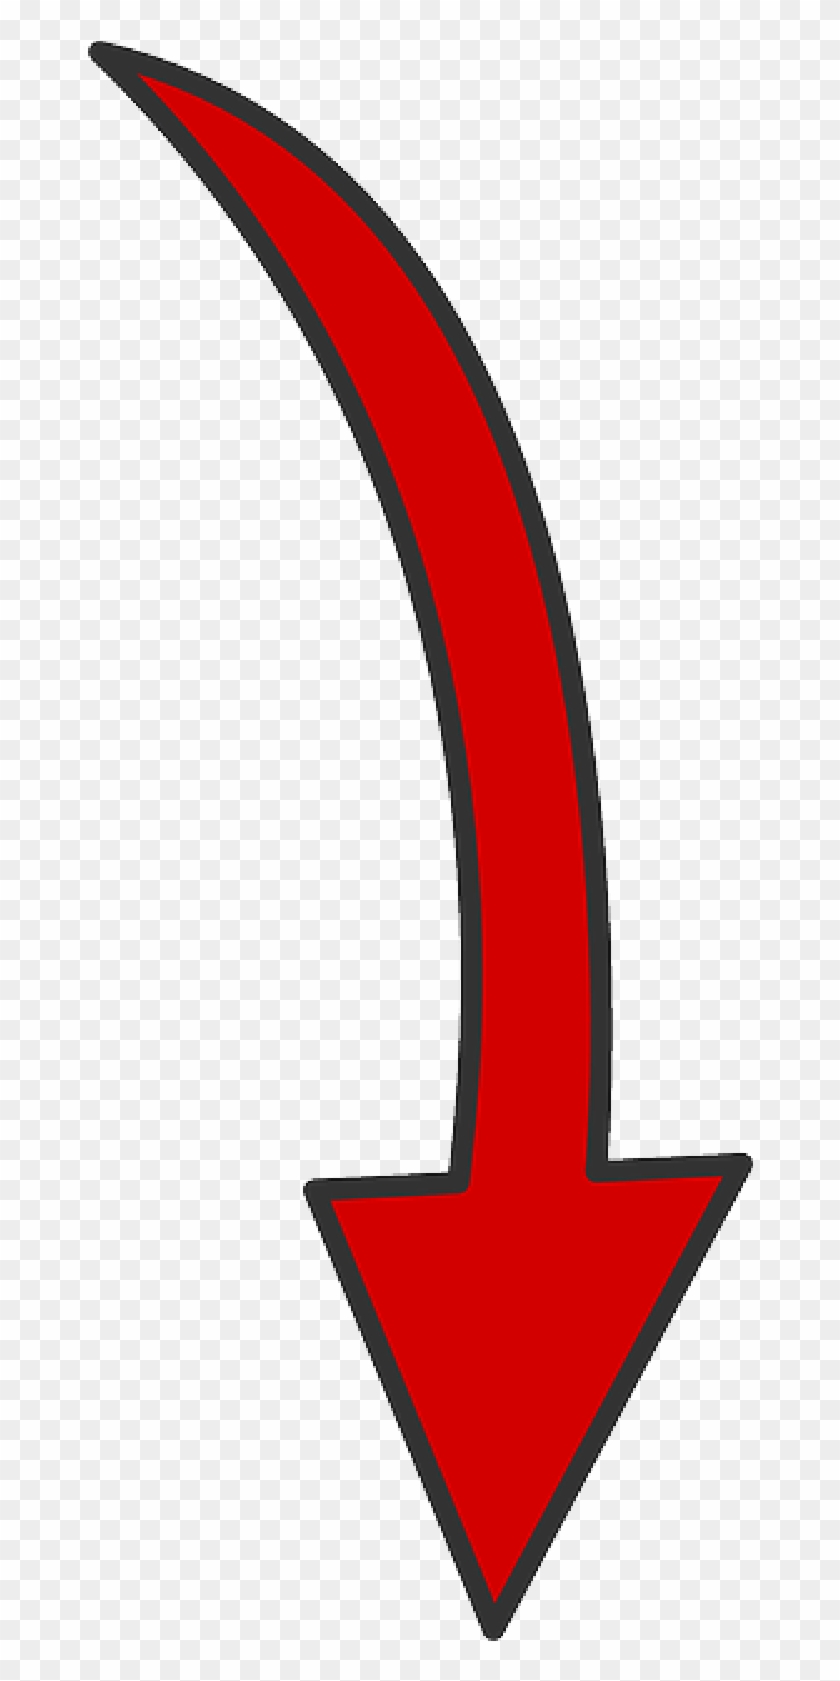 Red Curved Arrow Png White Pictures To Pin On Pinterest - Red Arrow Curved Down Clipart #466795